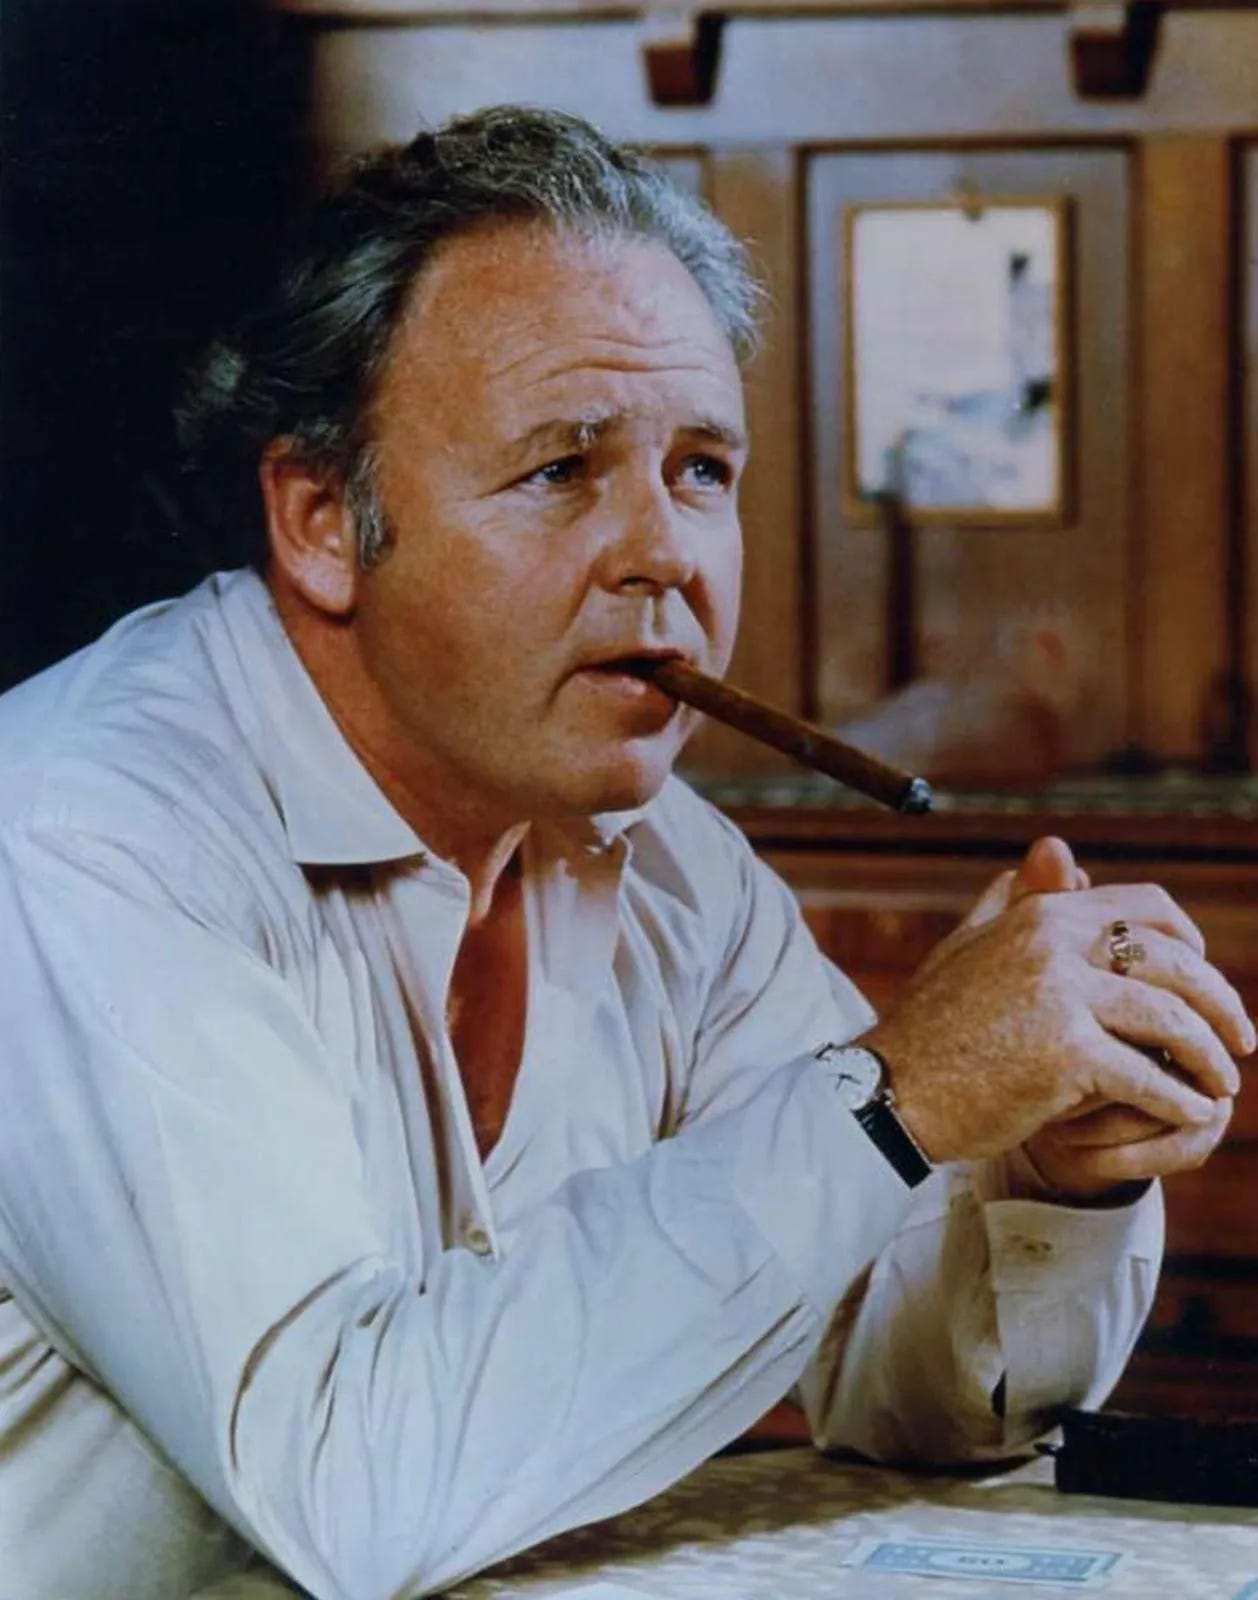 Archie Bunker played by Carroll O'Connor